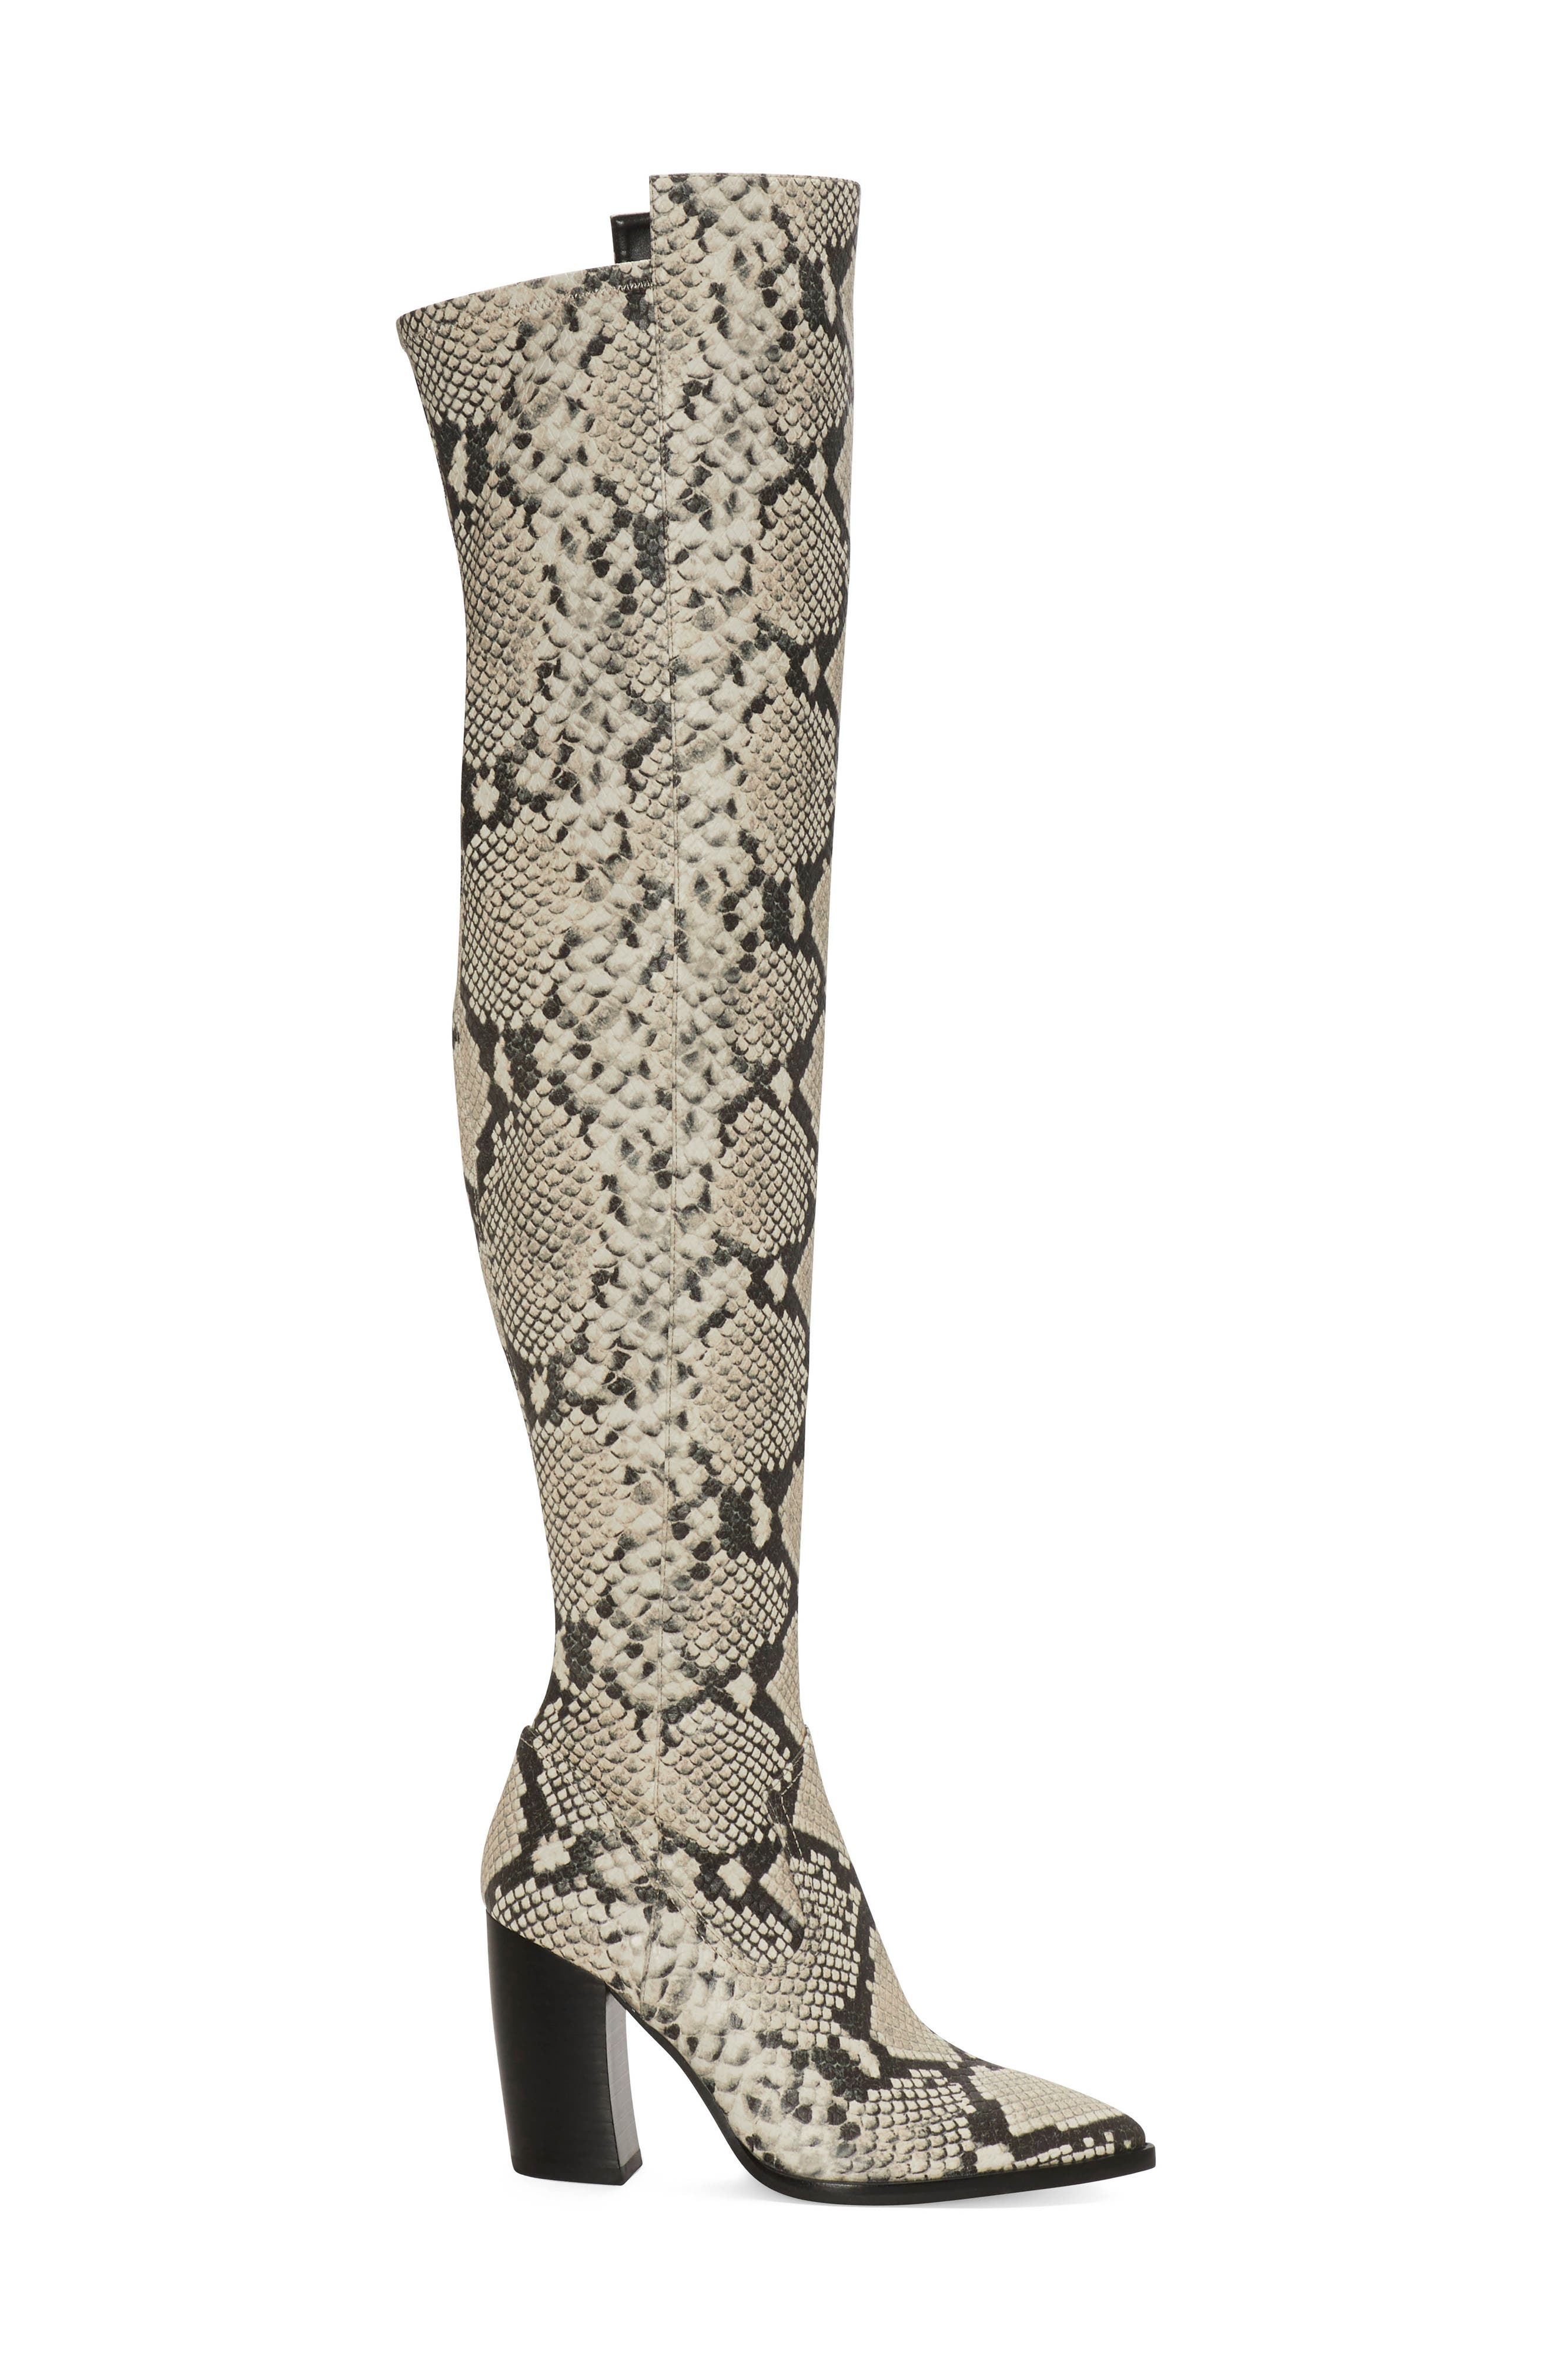 Vince Camuto | Cottara Over the Knee Boot | Nordstrom Rack